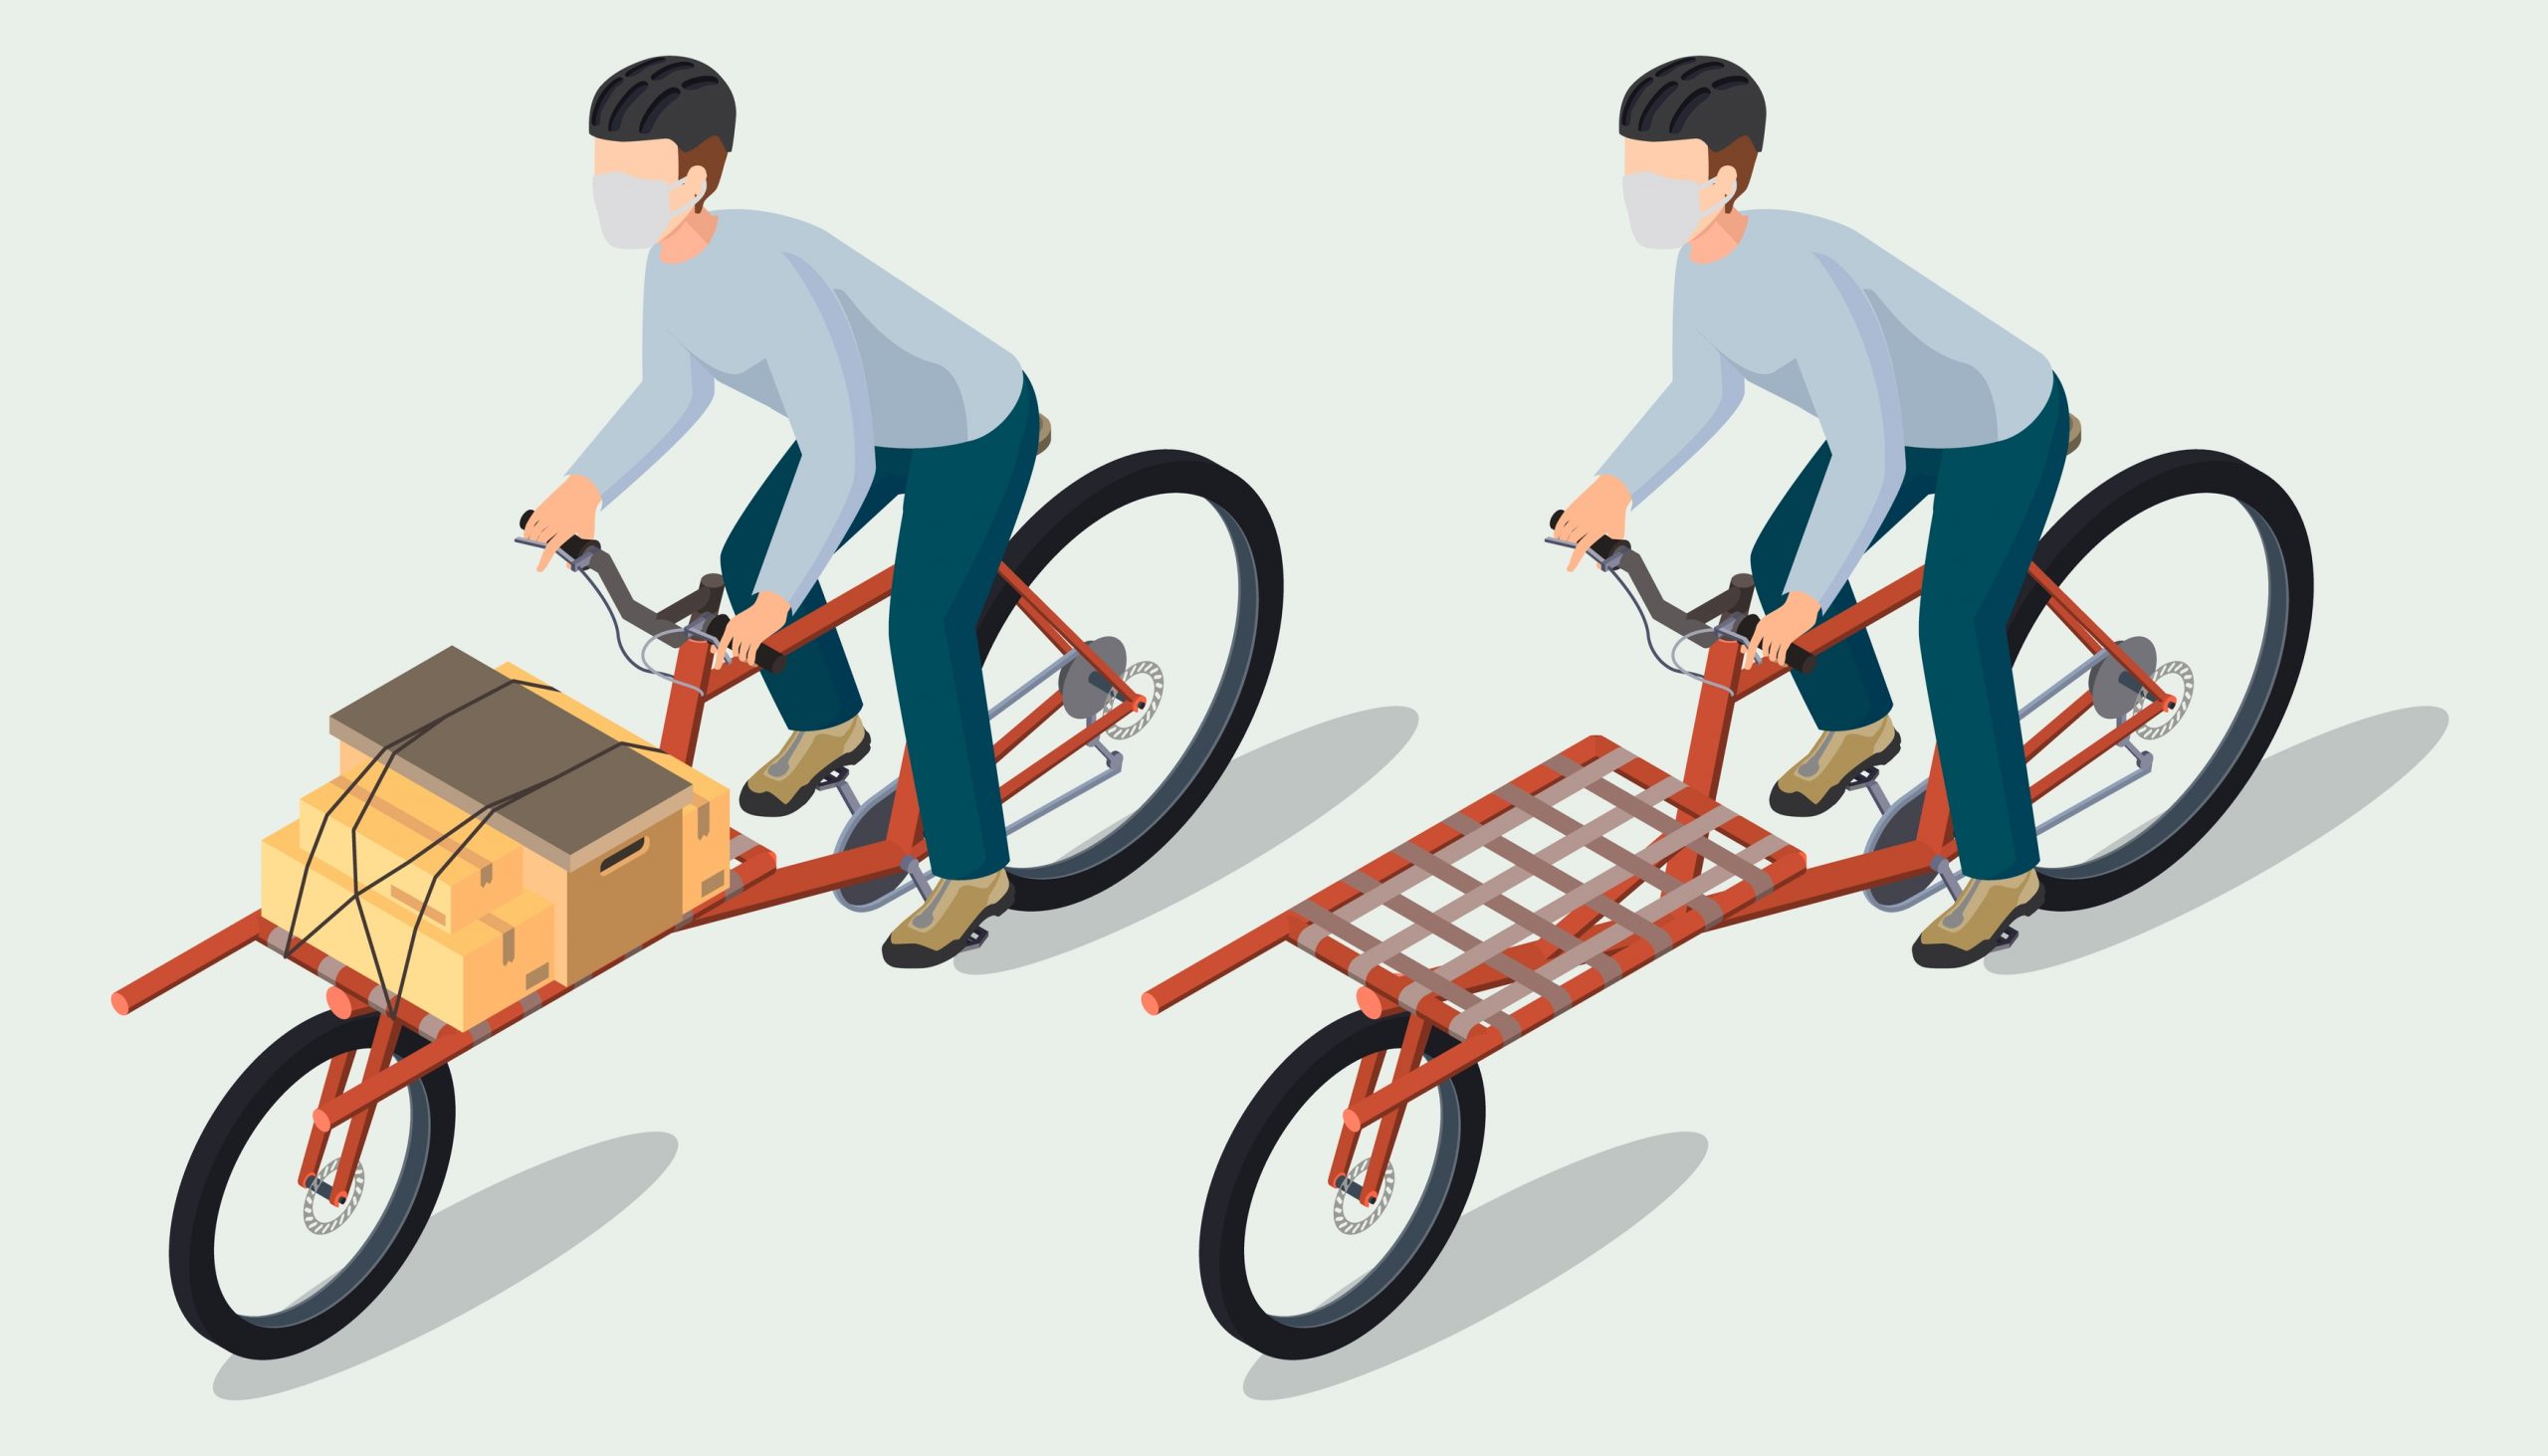 Isometric,Bicycle,Messenger,Making,A,Delivery,On,A,Cargo,Bike;